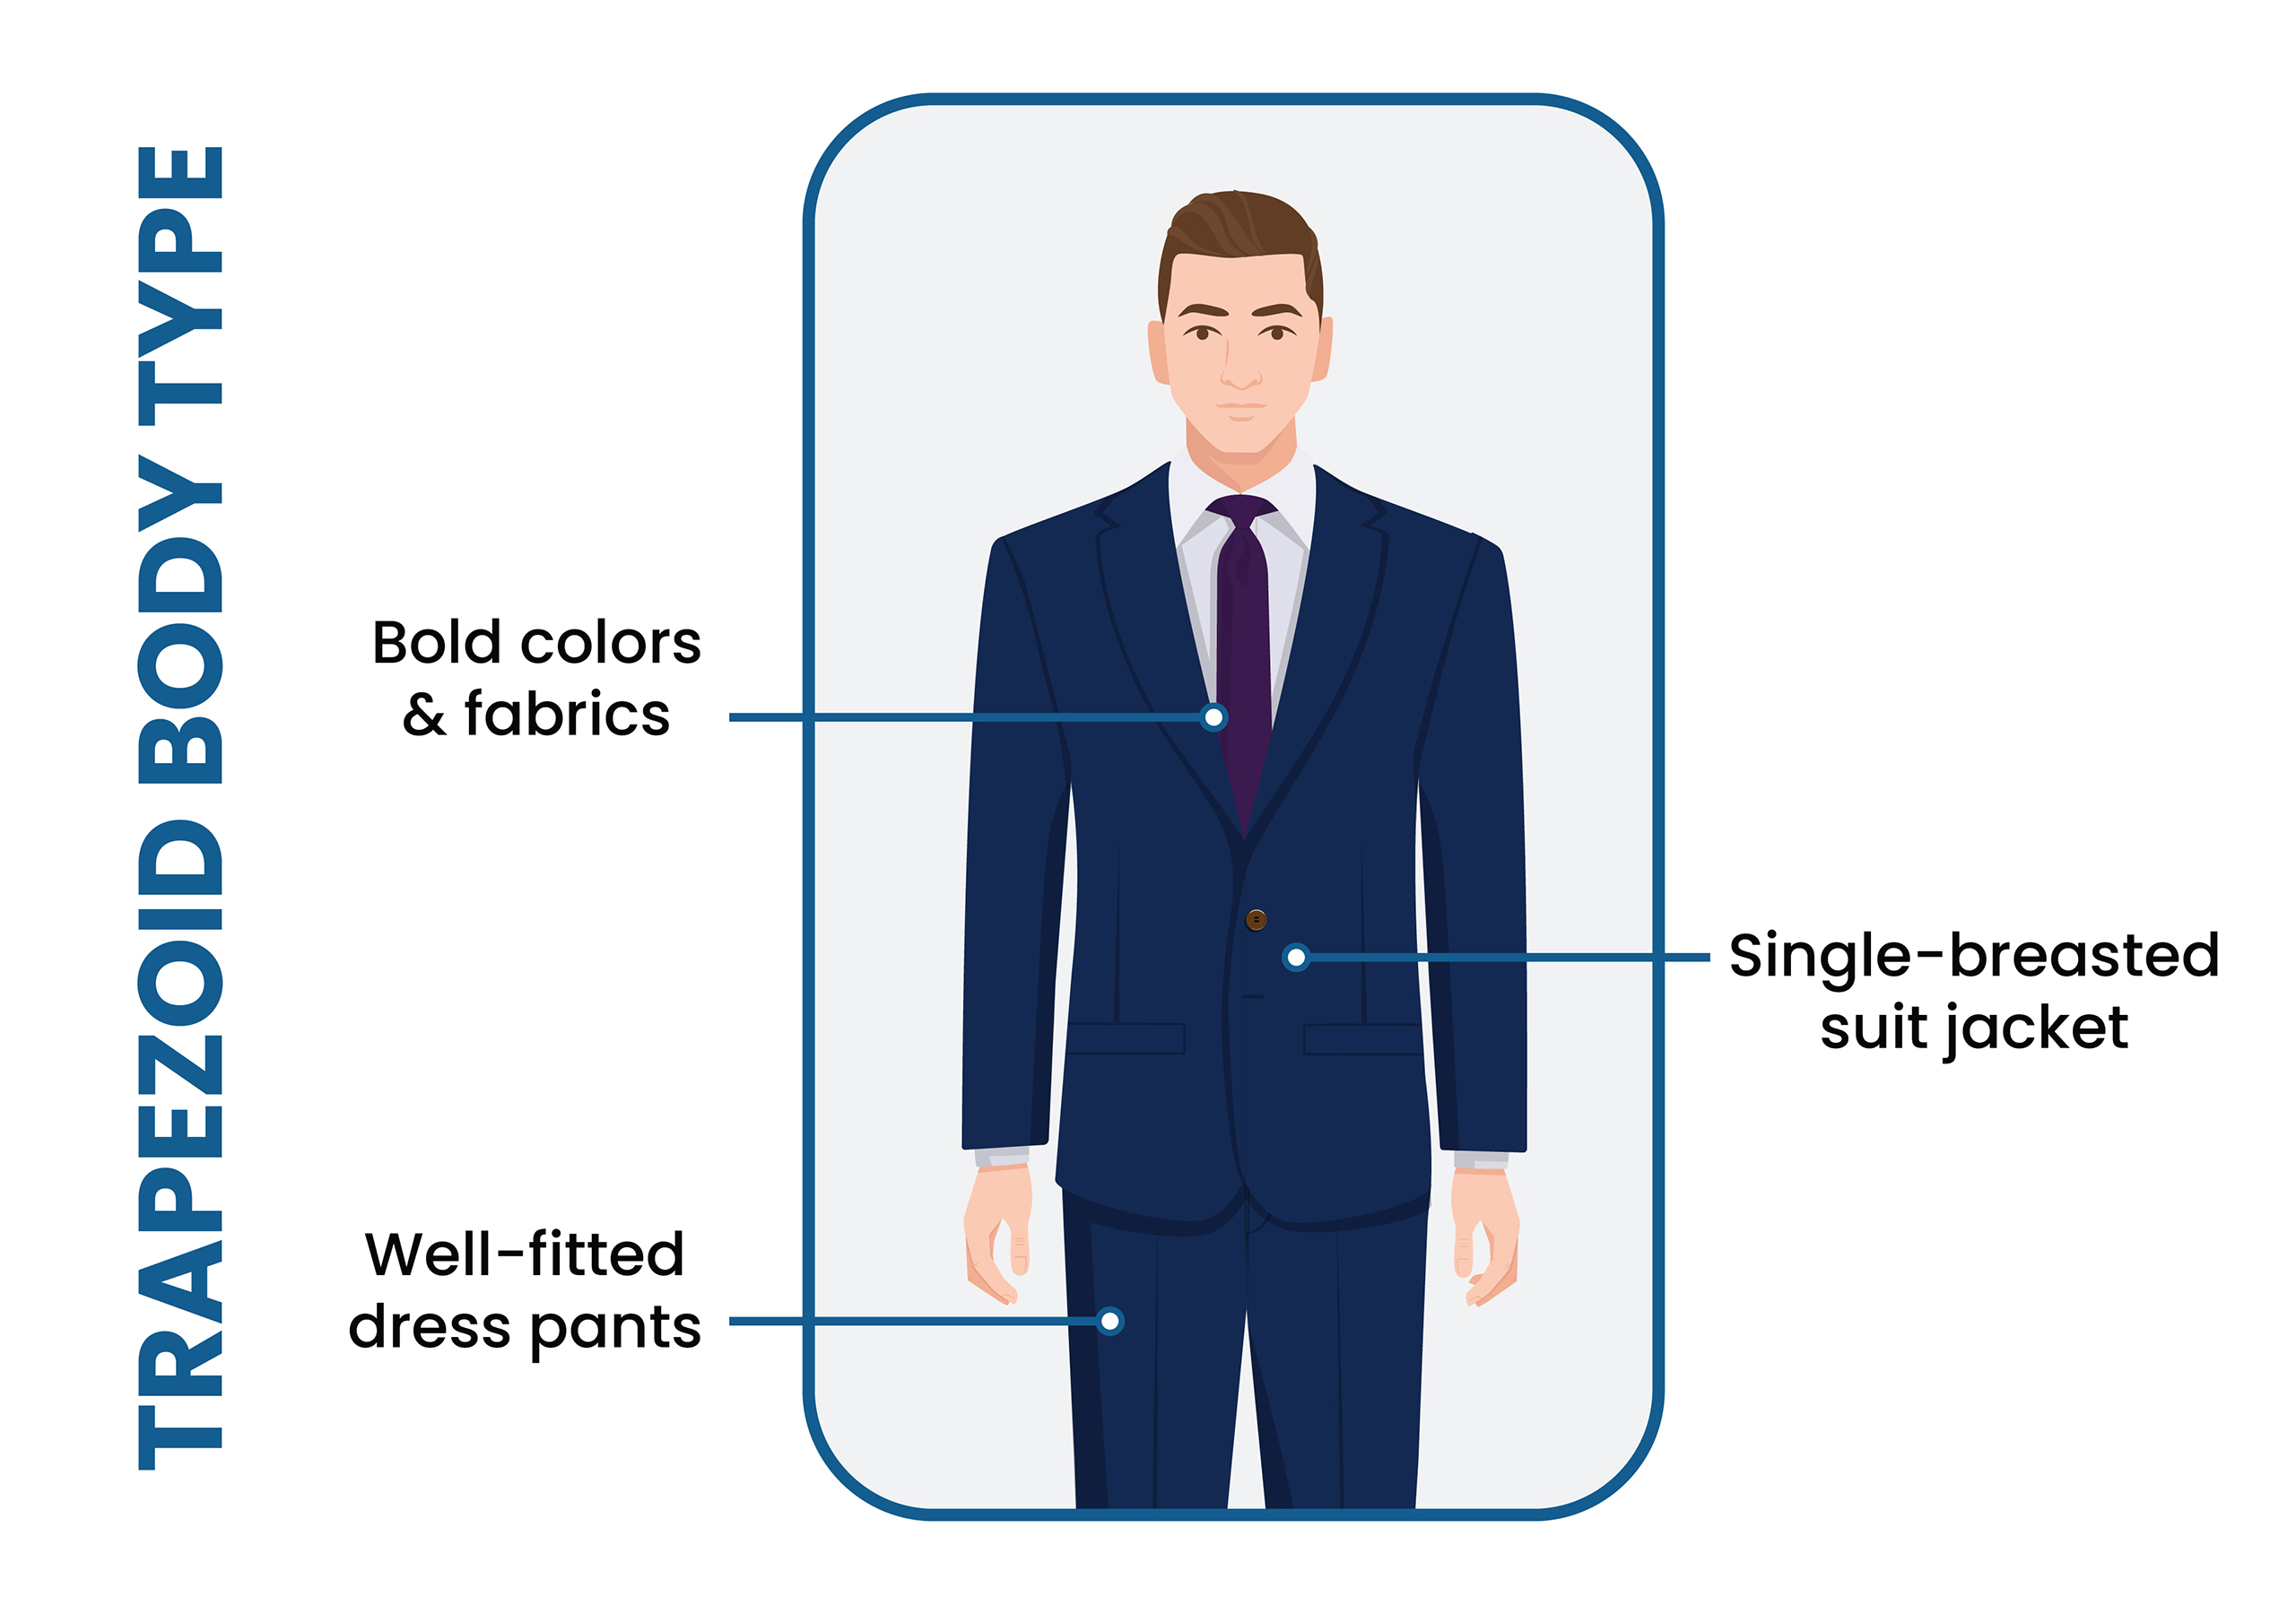 Essential Tips on Finding the Perfect Suit for Your Body Type